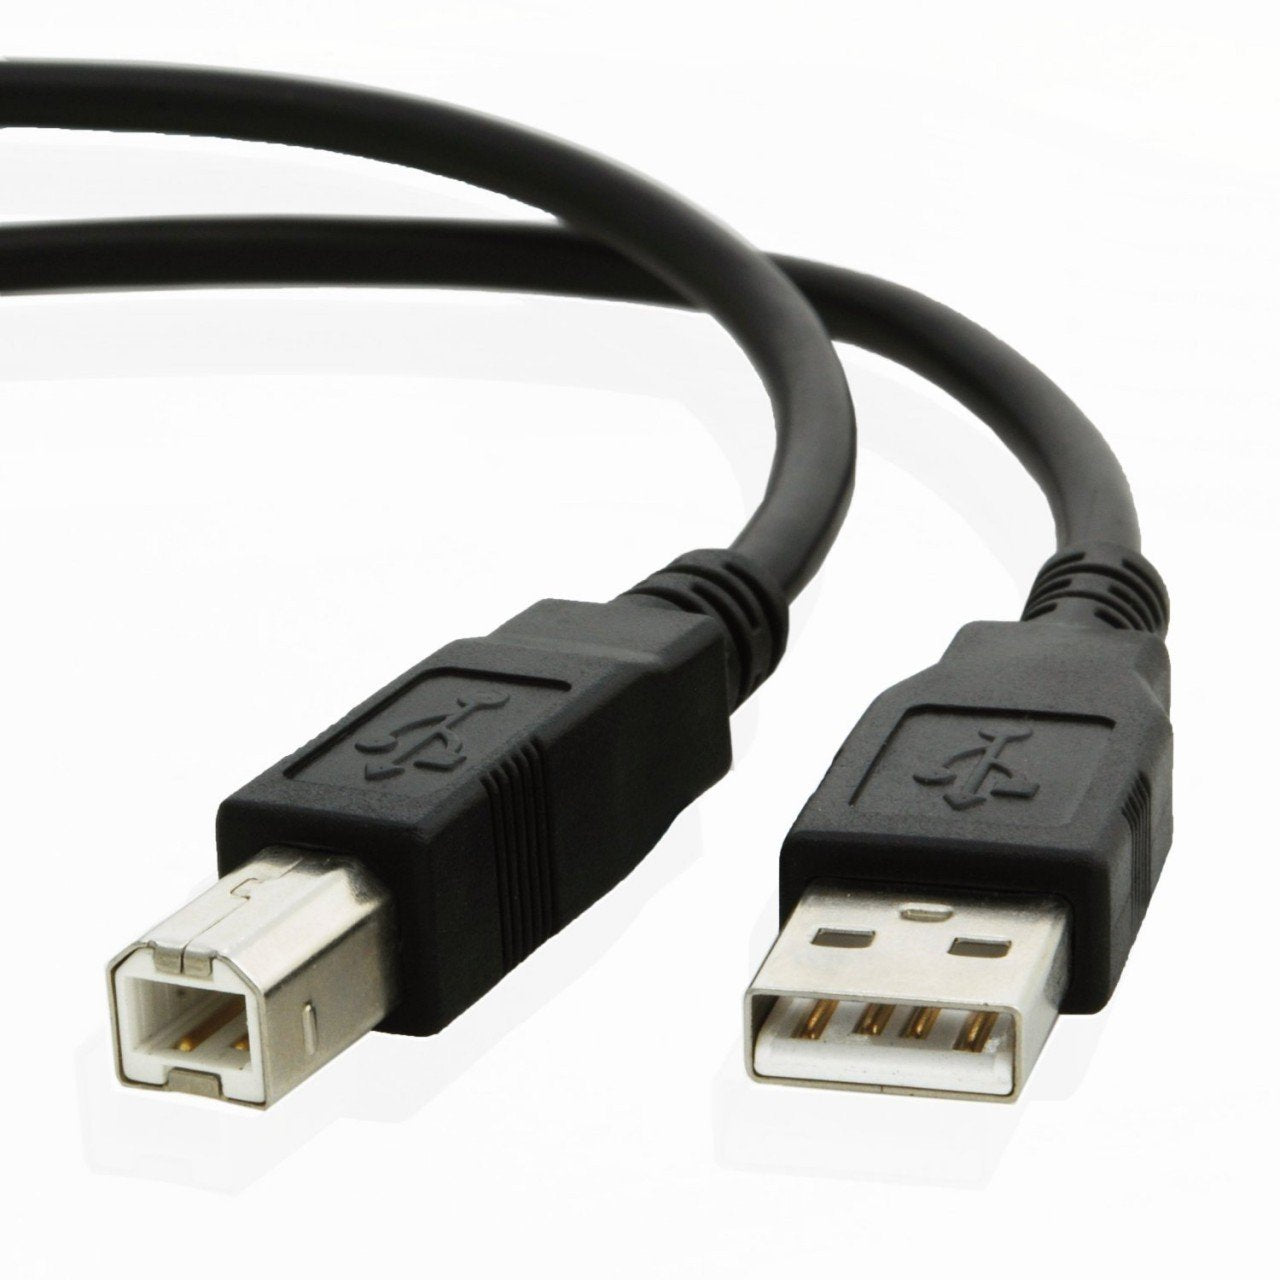 USB cable for Epson WORKFORCE PRO WF-5620